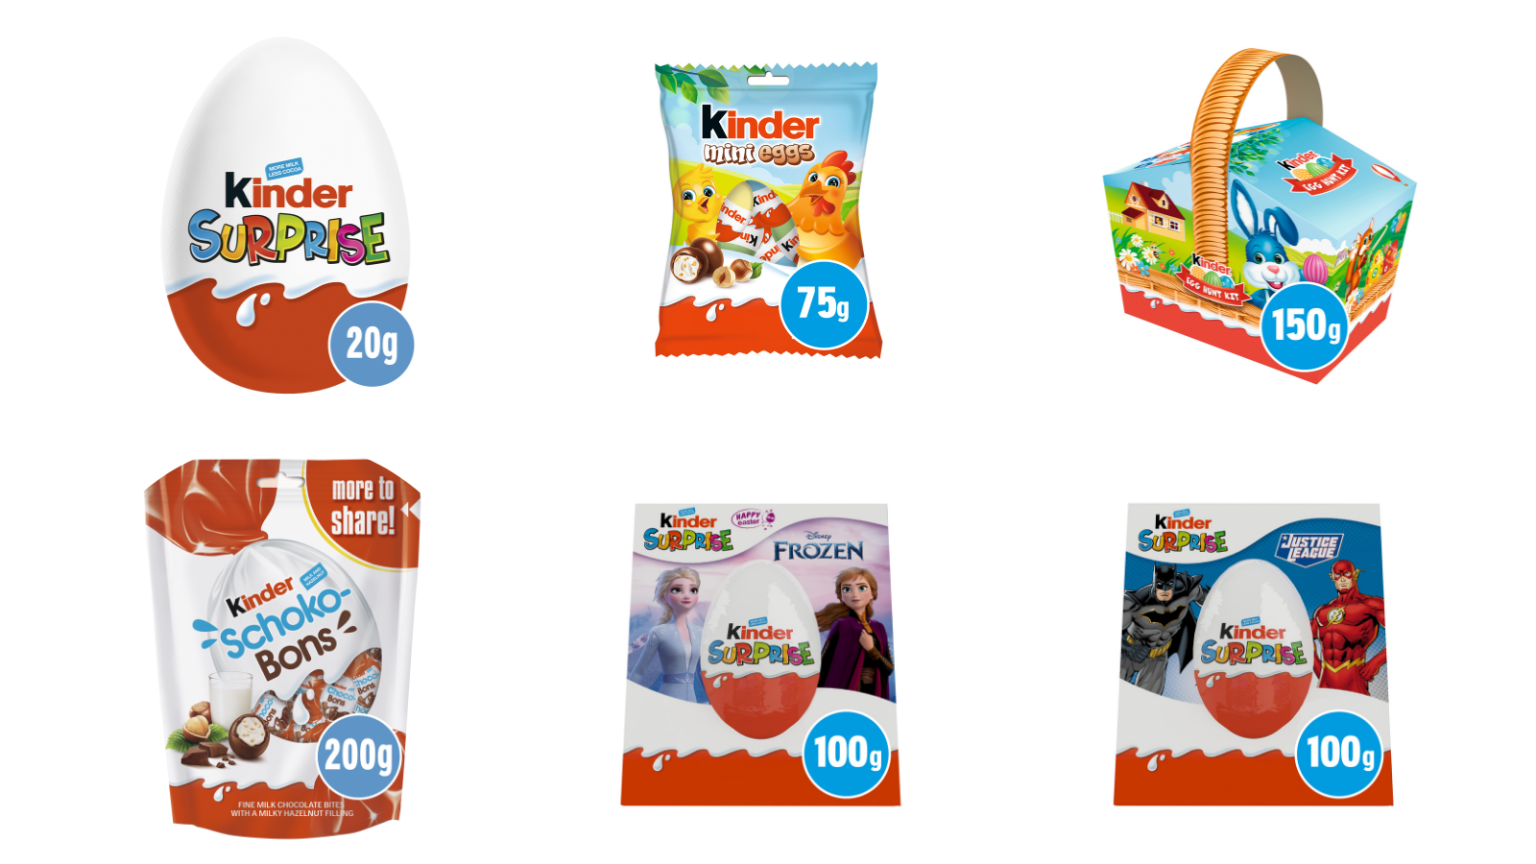 NEWS | Further Kinder products have been recalled following an outbreak of salmonella – FULL LIST